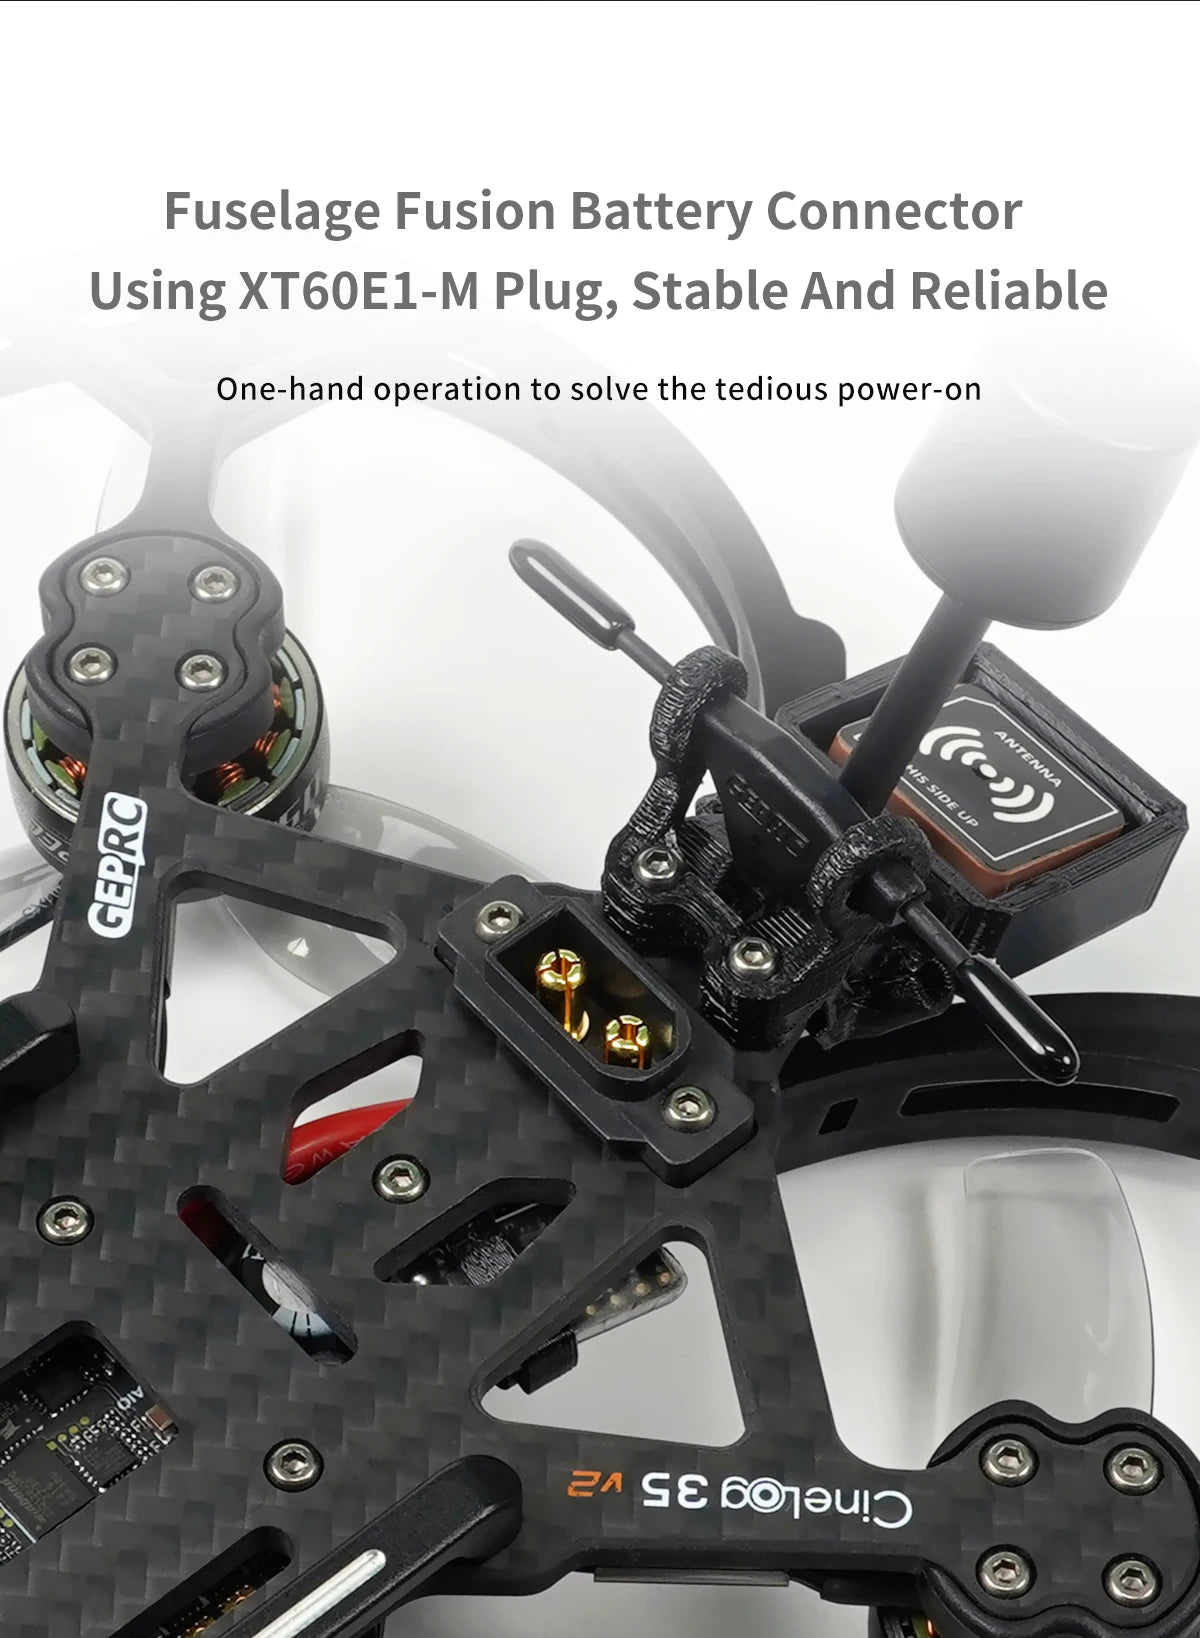 GEPRC Cinelog35 V2 Analog FPV Drone, Fusion Battery Connector Using XTGOE1-M Plug, Stable And Re